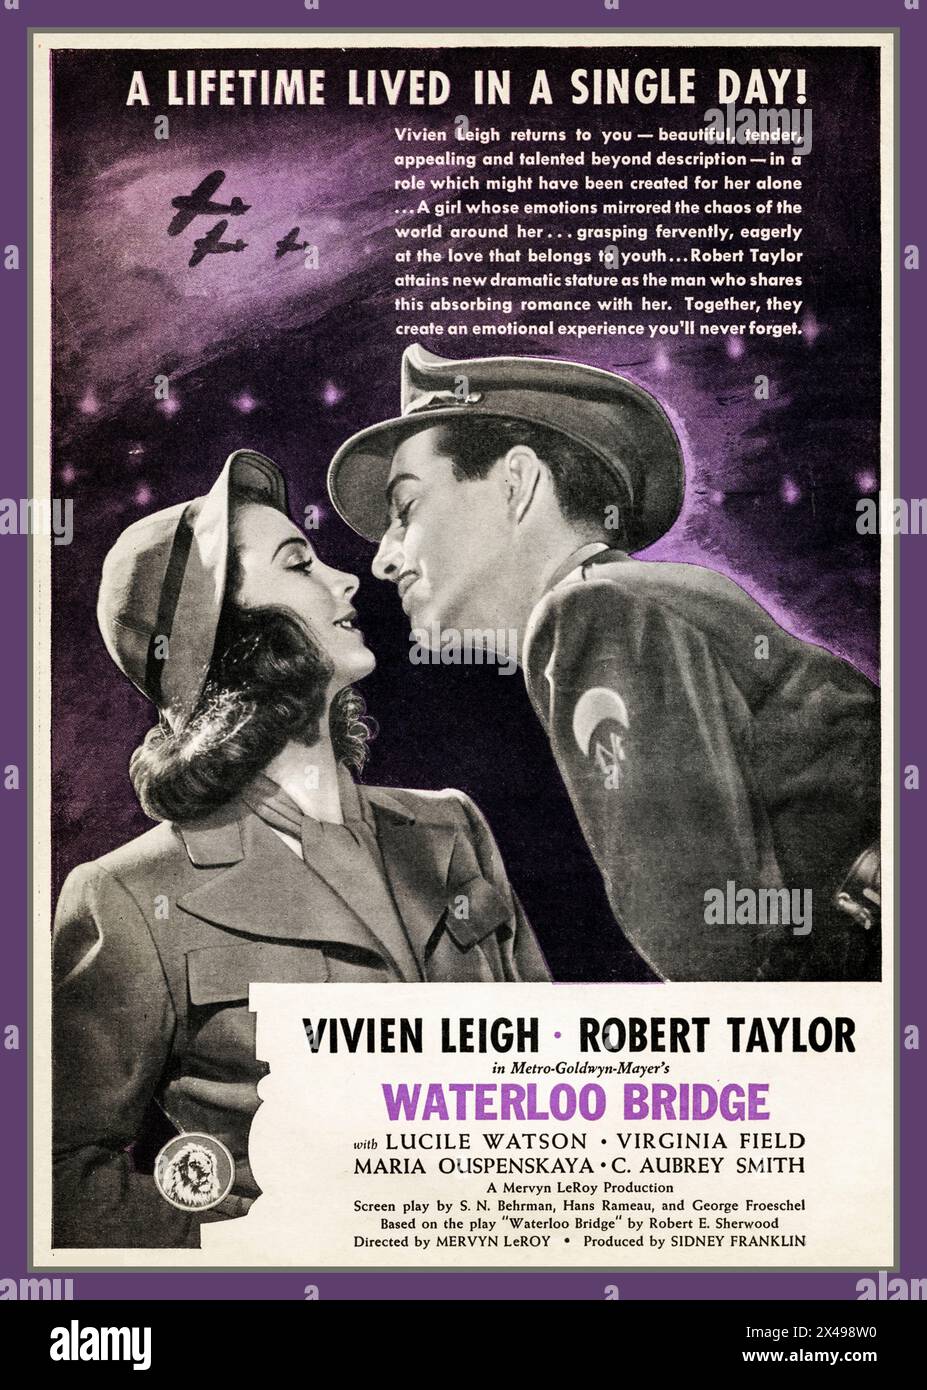 'Waterloo Bridge' vintage movie film poster, is a 1940 American drama film. In an extended flashback narration, it recounts the story of a dancer and an army captain who meet by chance on Waterloo Bridge in WW2 London. The film was made by Metro-Goldwyn-Mayer, directed by Mervyn LeRoy and produced by Sidney Franklin and Mervyn LeRoy. The screenplay is by S. N. Behrman, Hans Rameau and George Froeschel, based on the Broadway drama by Robert E. Sherwood. The music is by Herbert Stothart and cinematography by Joseph Ruttenberg. The film stars Robert Taylor and Vivien Leigh. Stock Photo